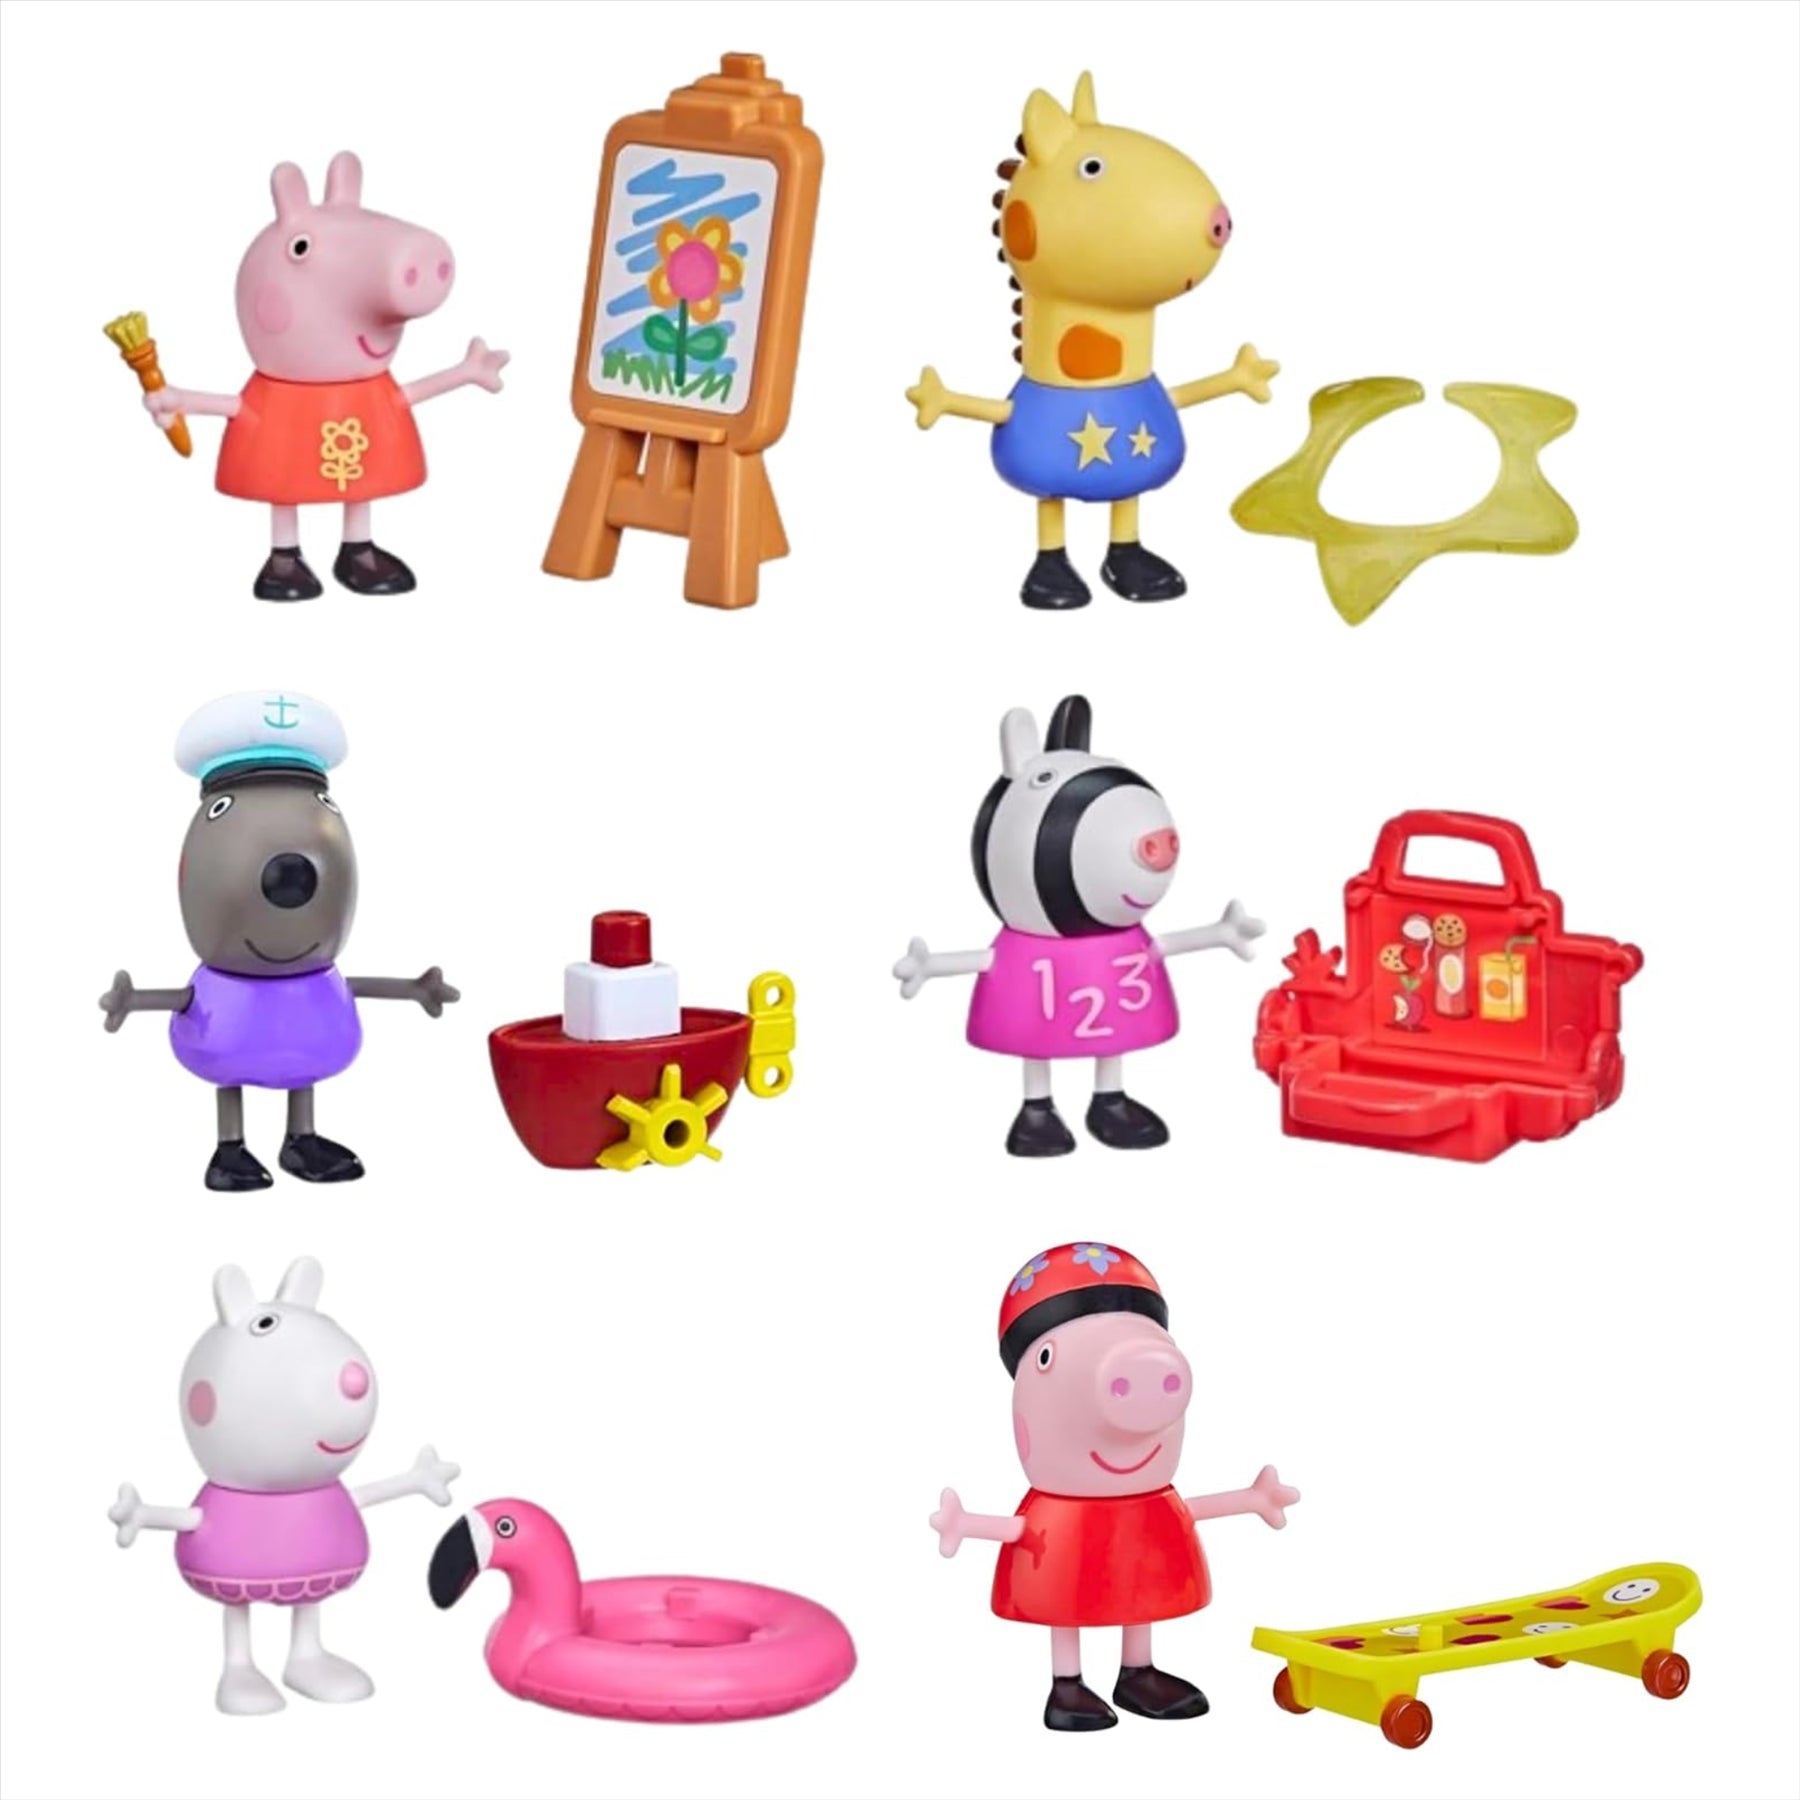 Peppa Pig - 3" 8cm Articulated Figure & Accessory Sets - Set of All 6 Characters - Toptoys2u